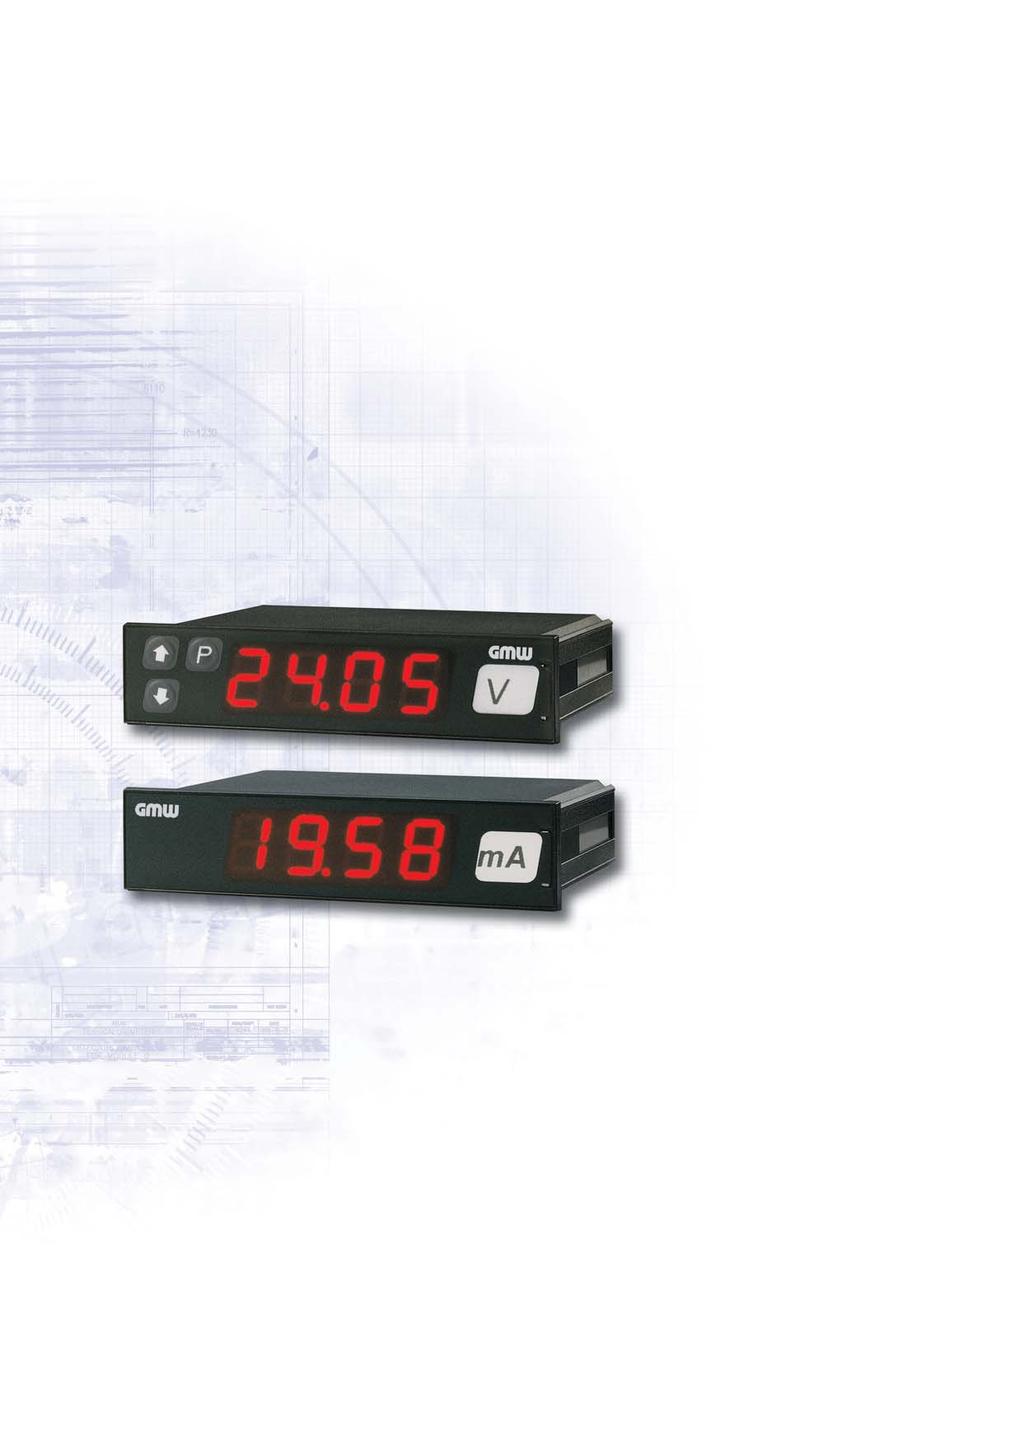 The modular DIGEM 96 x 24 B5 digital indicator is a high precision panel meter with a programmable display range.